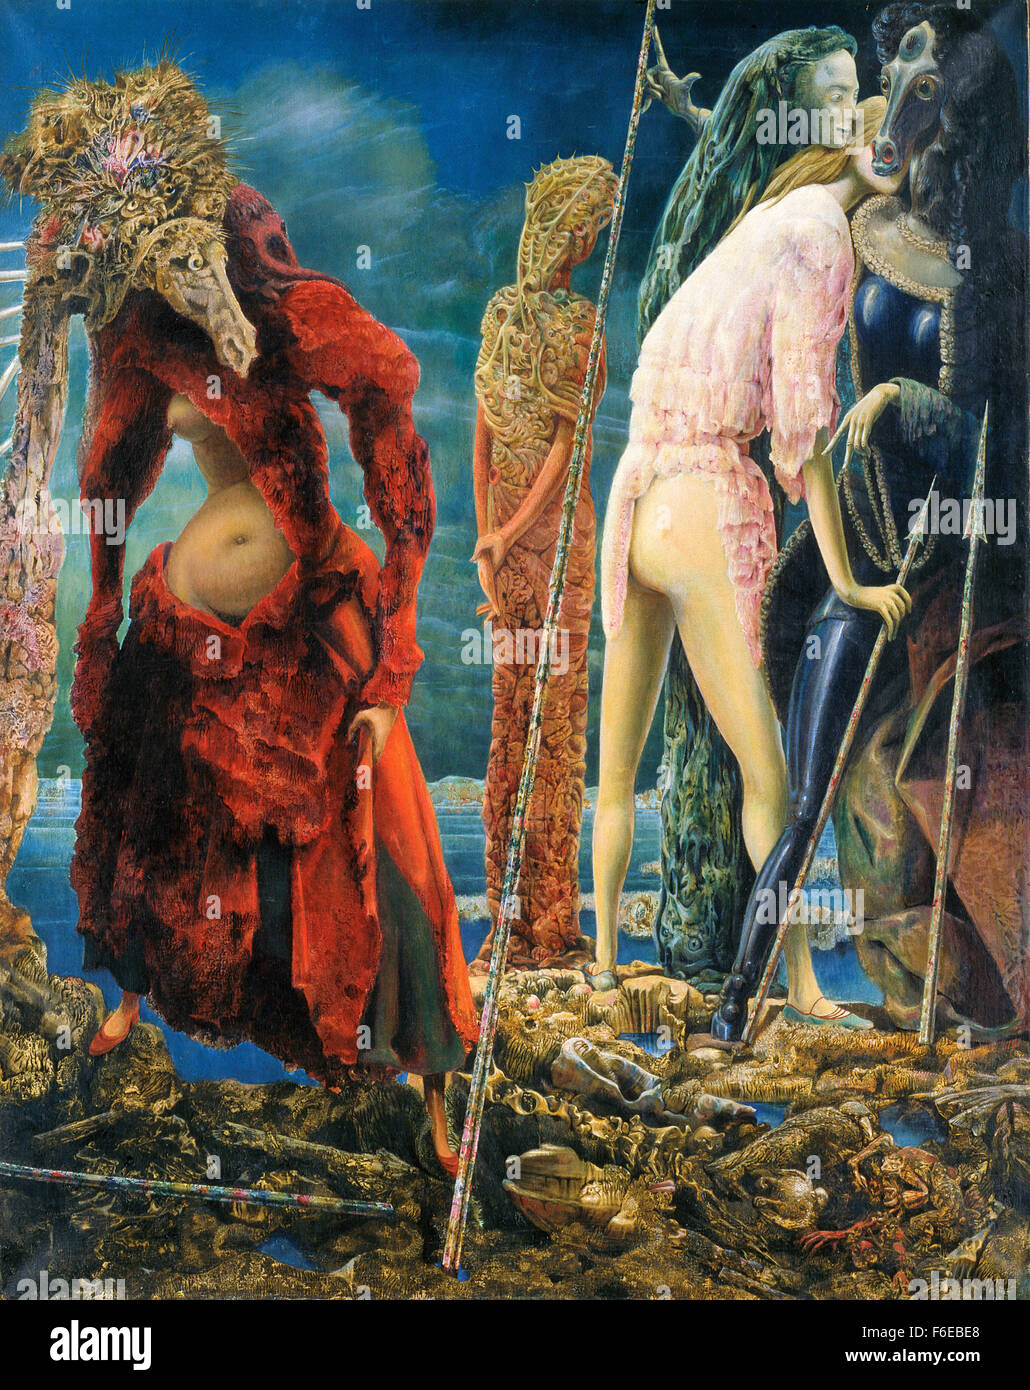 Max Ernst - The Antipope Stock Photo